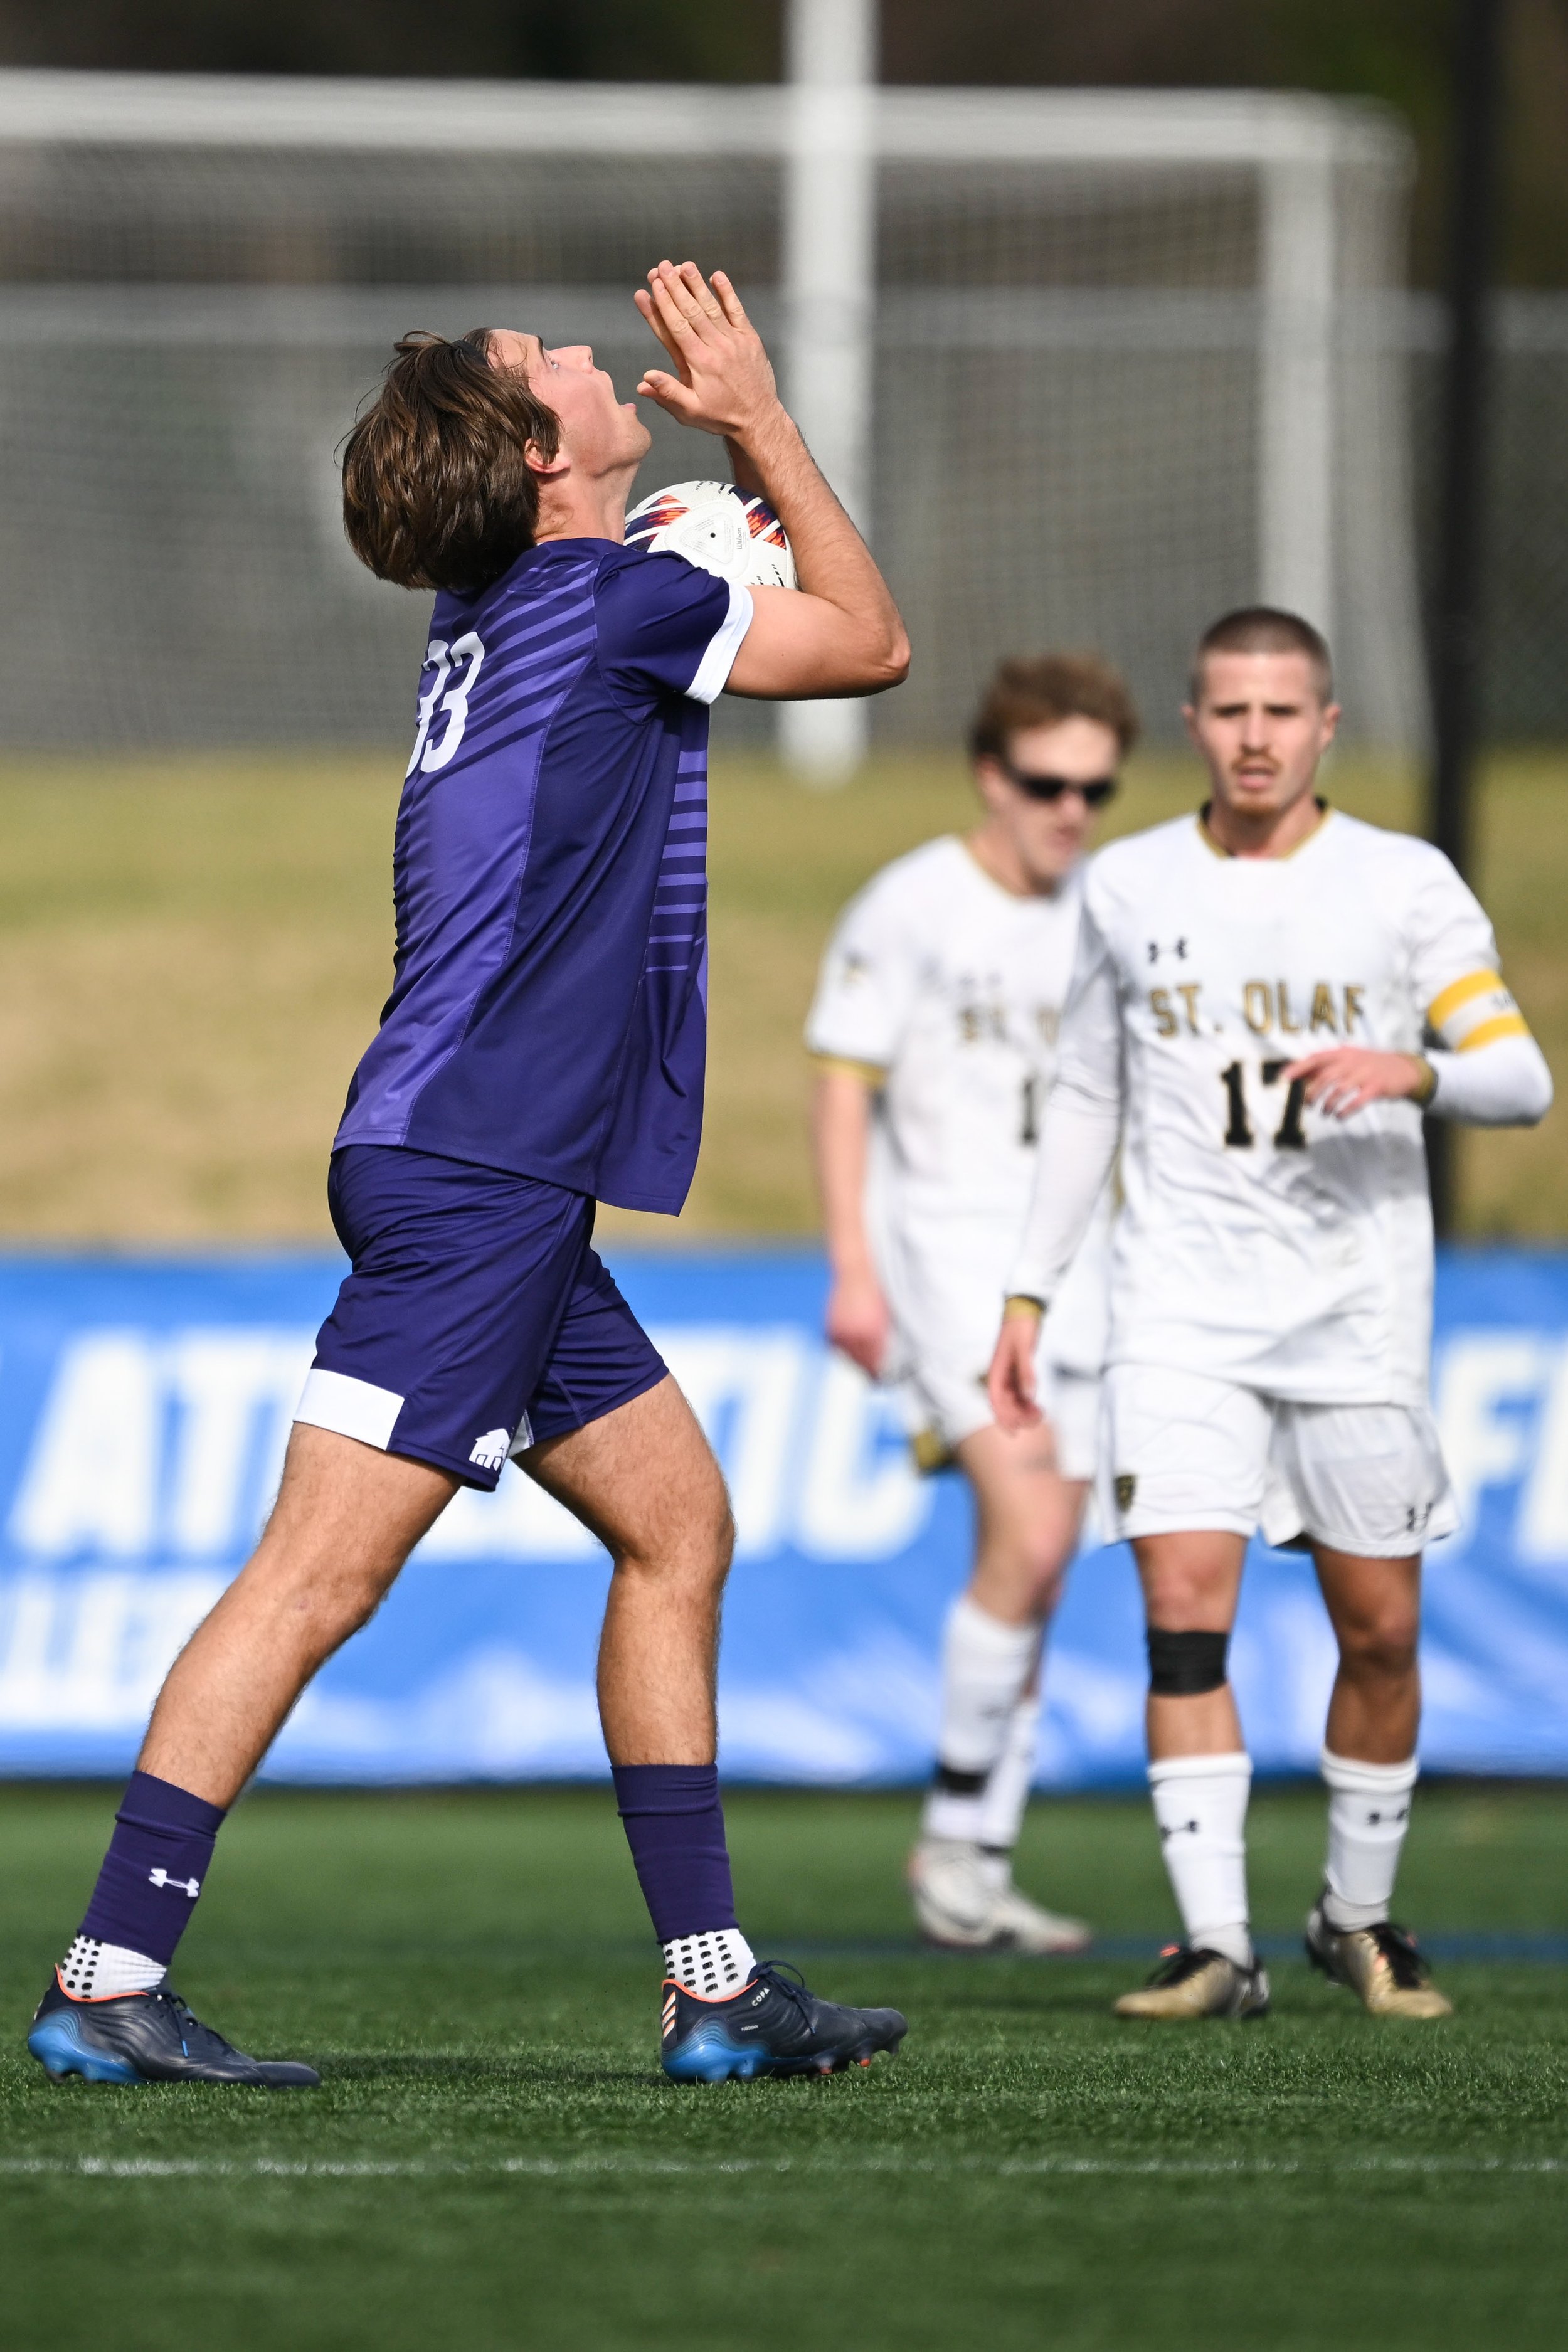  SALEM, VIRGINIA - DECEMBER 03:  Simon Kalinauskas #33 of the Amherst Mammoths reacts during the 2023 Division III Men's Soccer Championship against the St. Olaf Oles at Donald J. Kerr Stadium on December 03, 2023 in Salem, Virginia. St.  (Photo by G